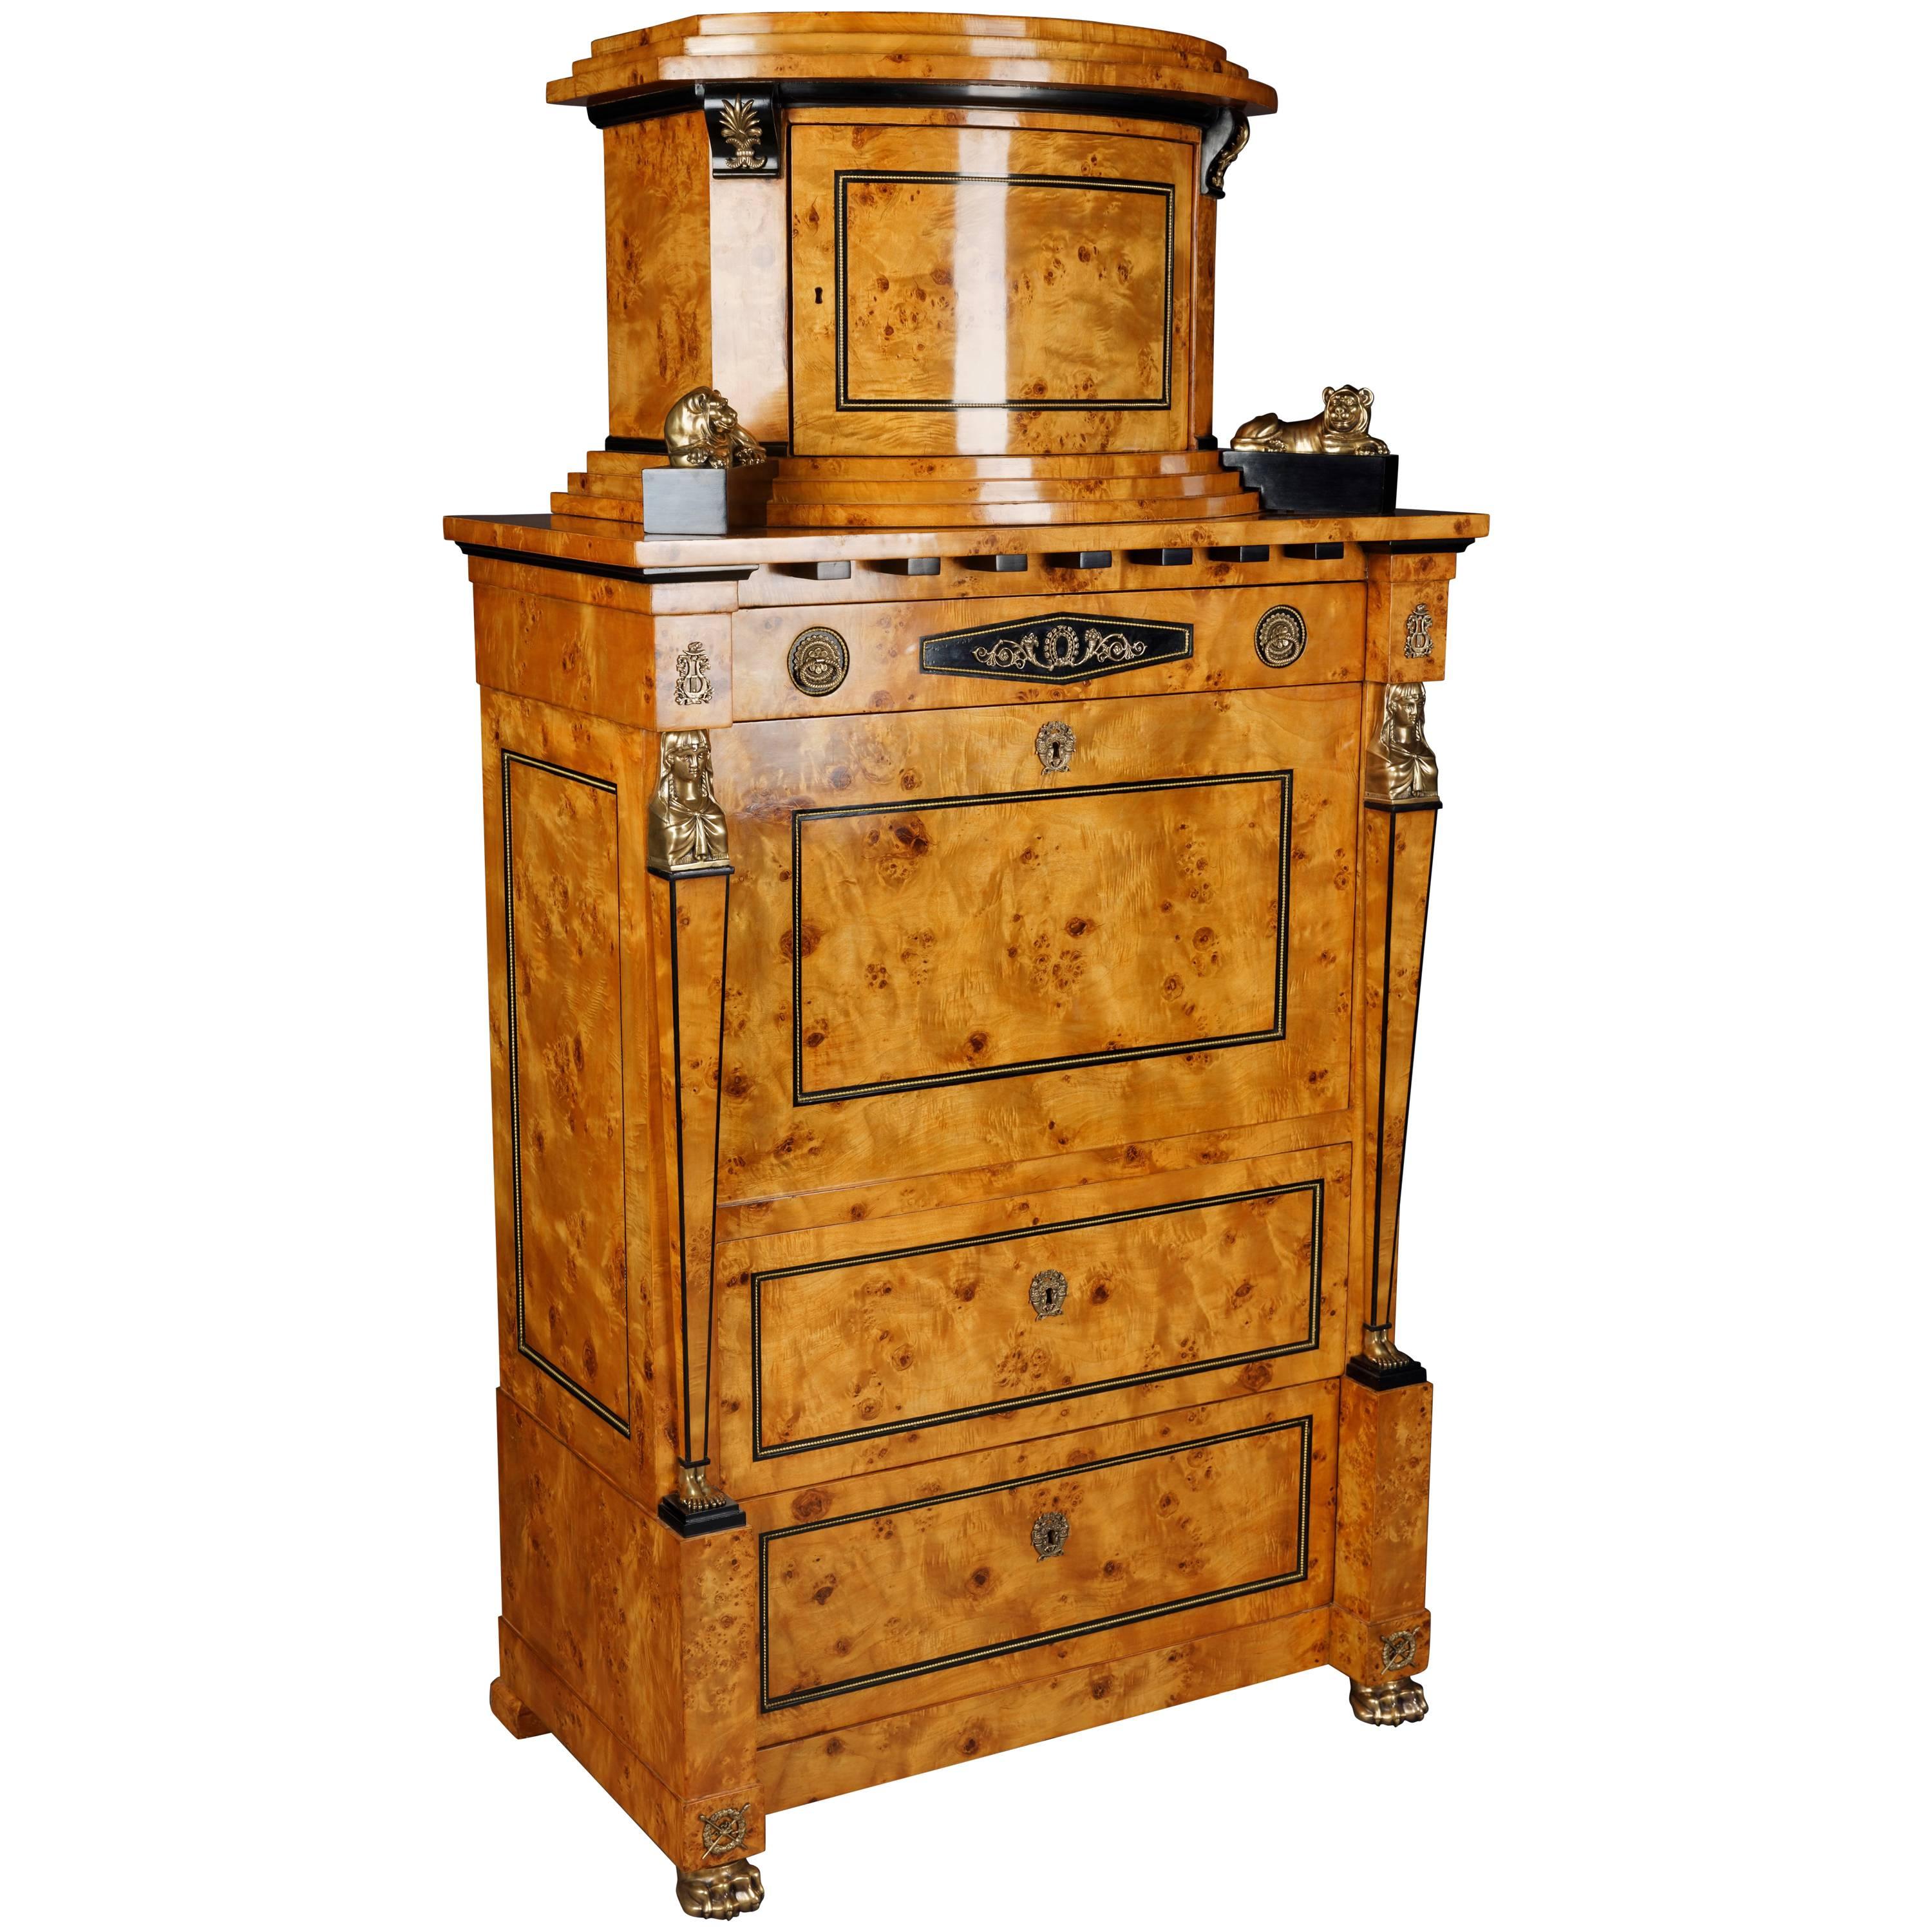 Courtly Secretaire in the Empire Style